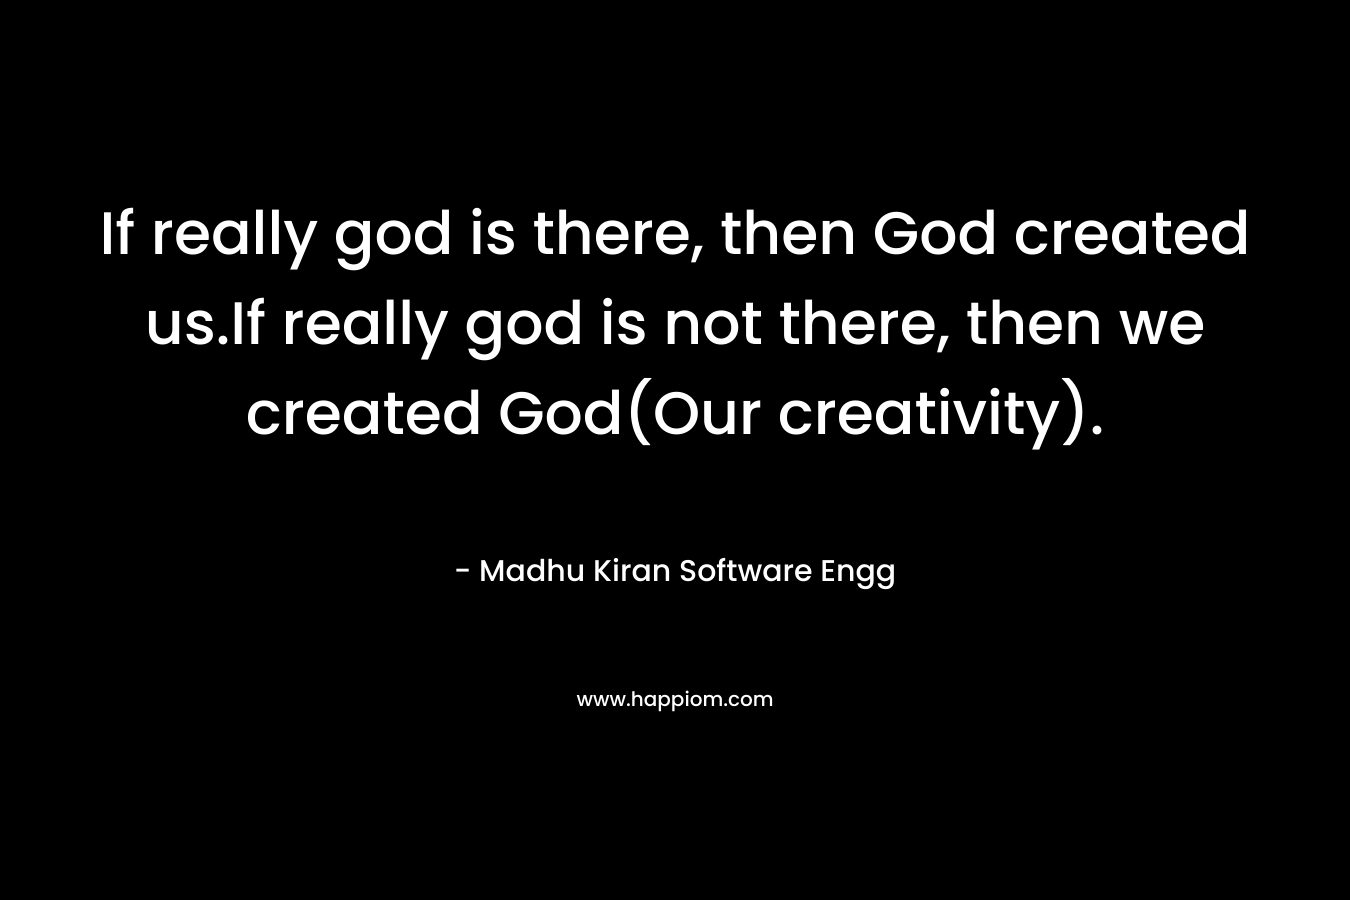 If really god is there, then God created us.If really god is not there, then we created God(Our creativity).